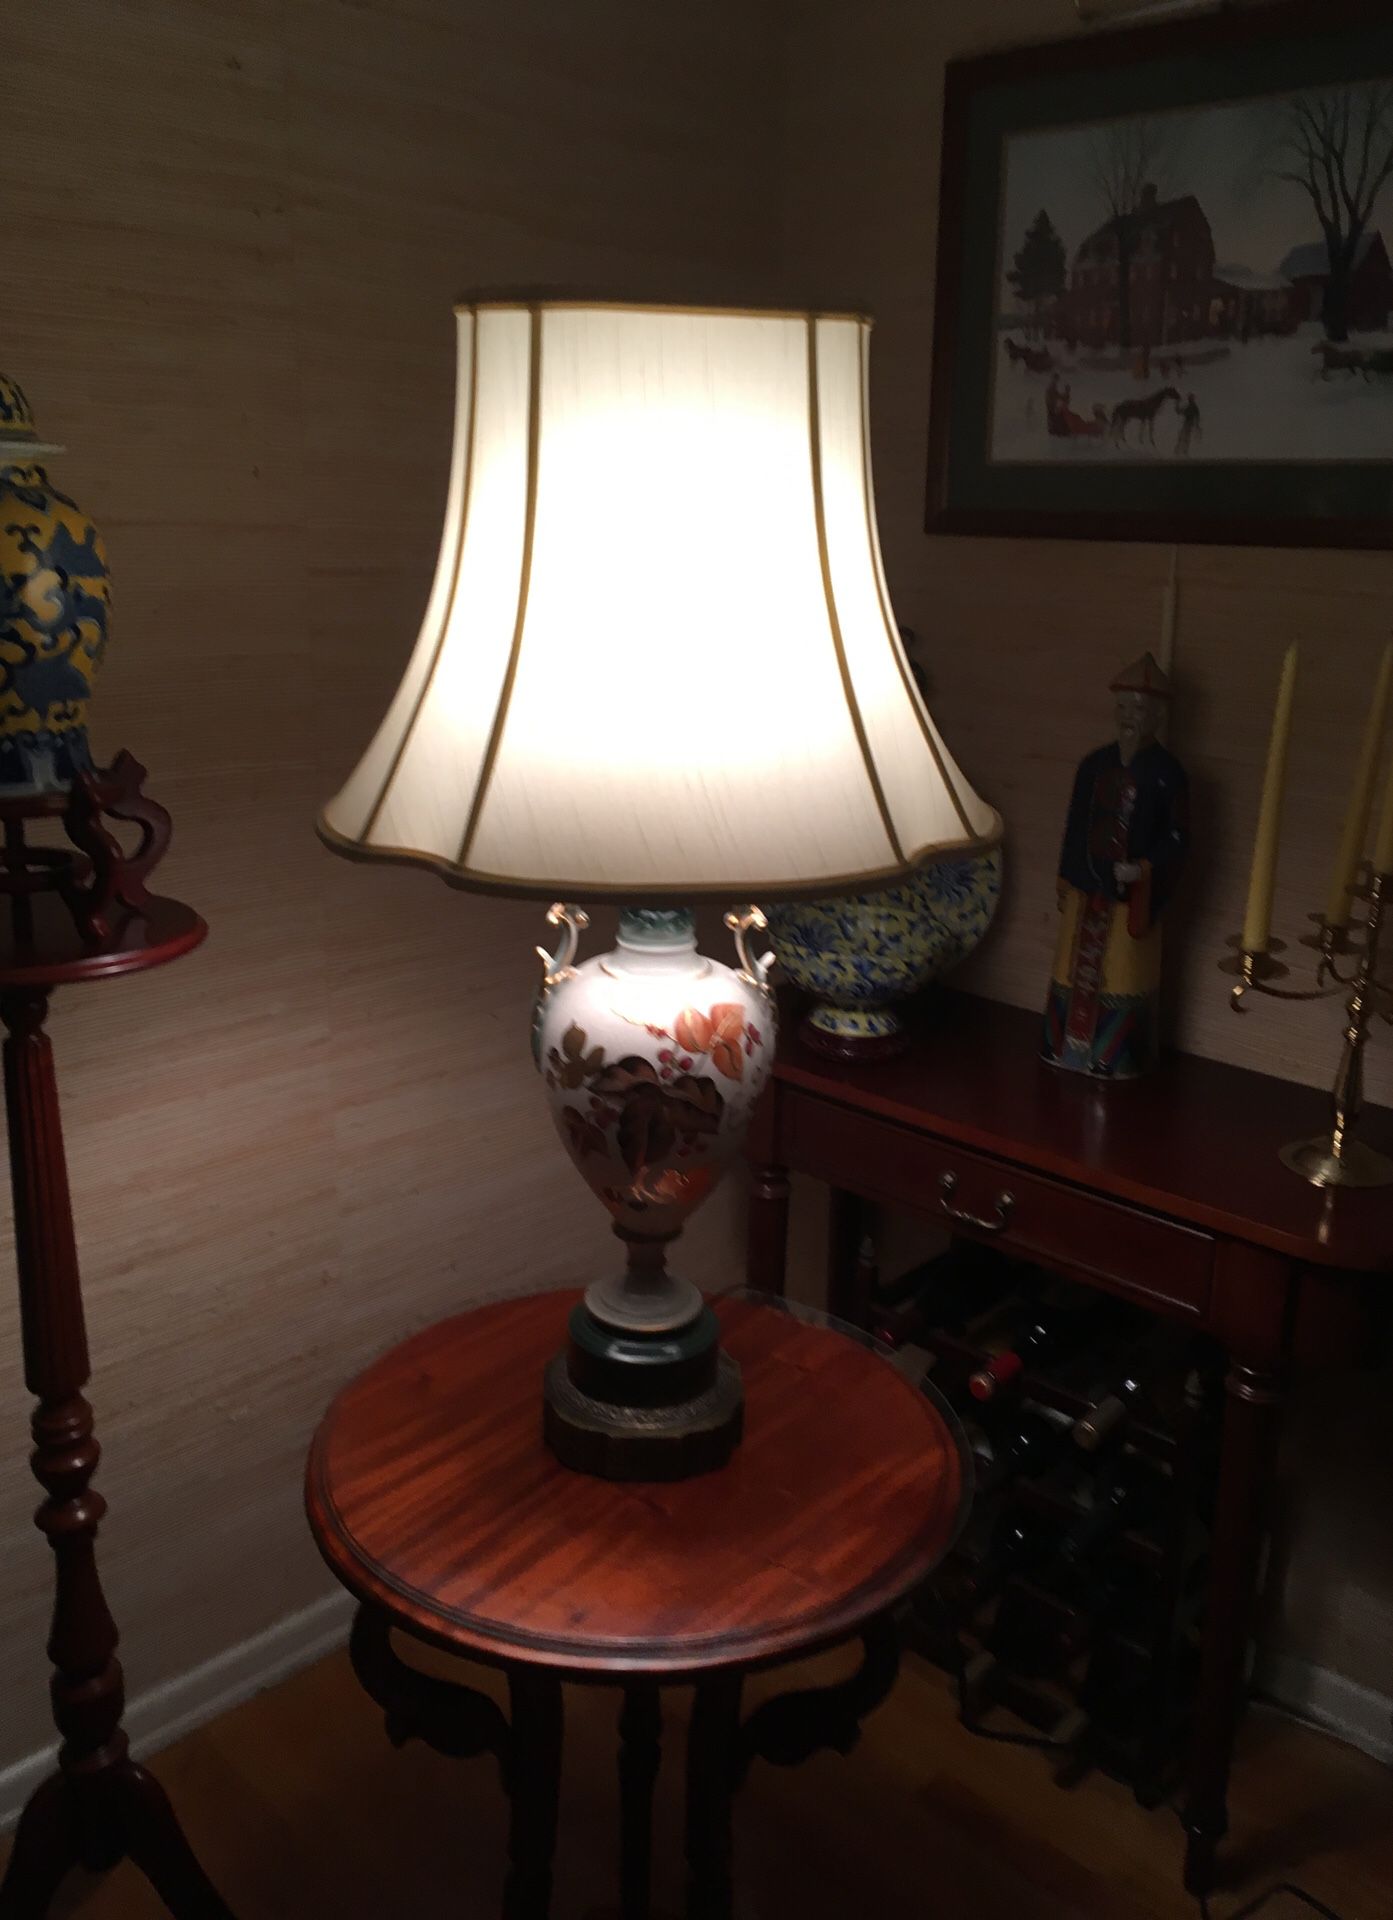 Lovely antique lamp